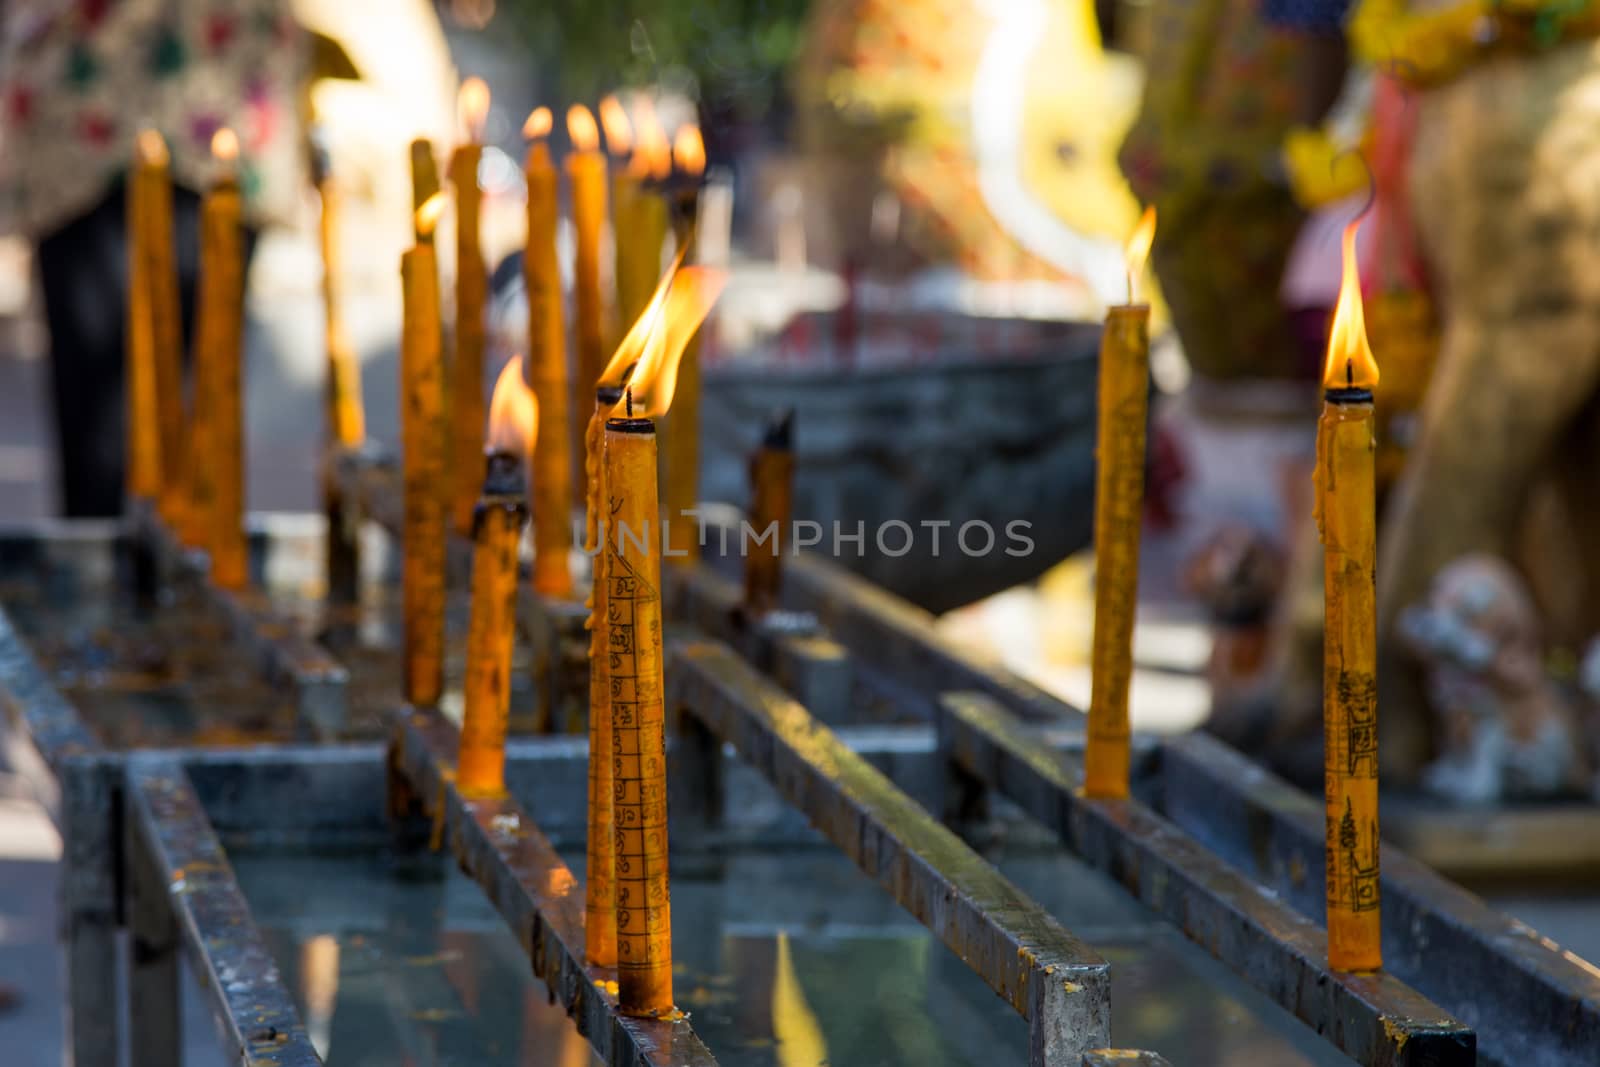 Thailand dog temple, Wat Ket Karem, with votive lighted candles with statues and sleeping dogs and votive offerings. High quality photo